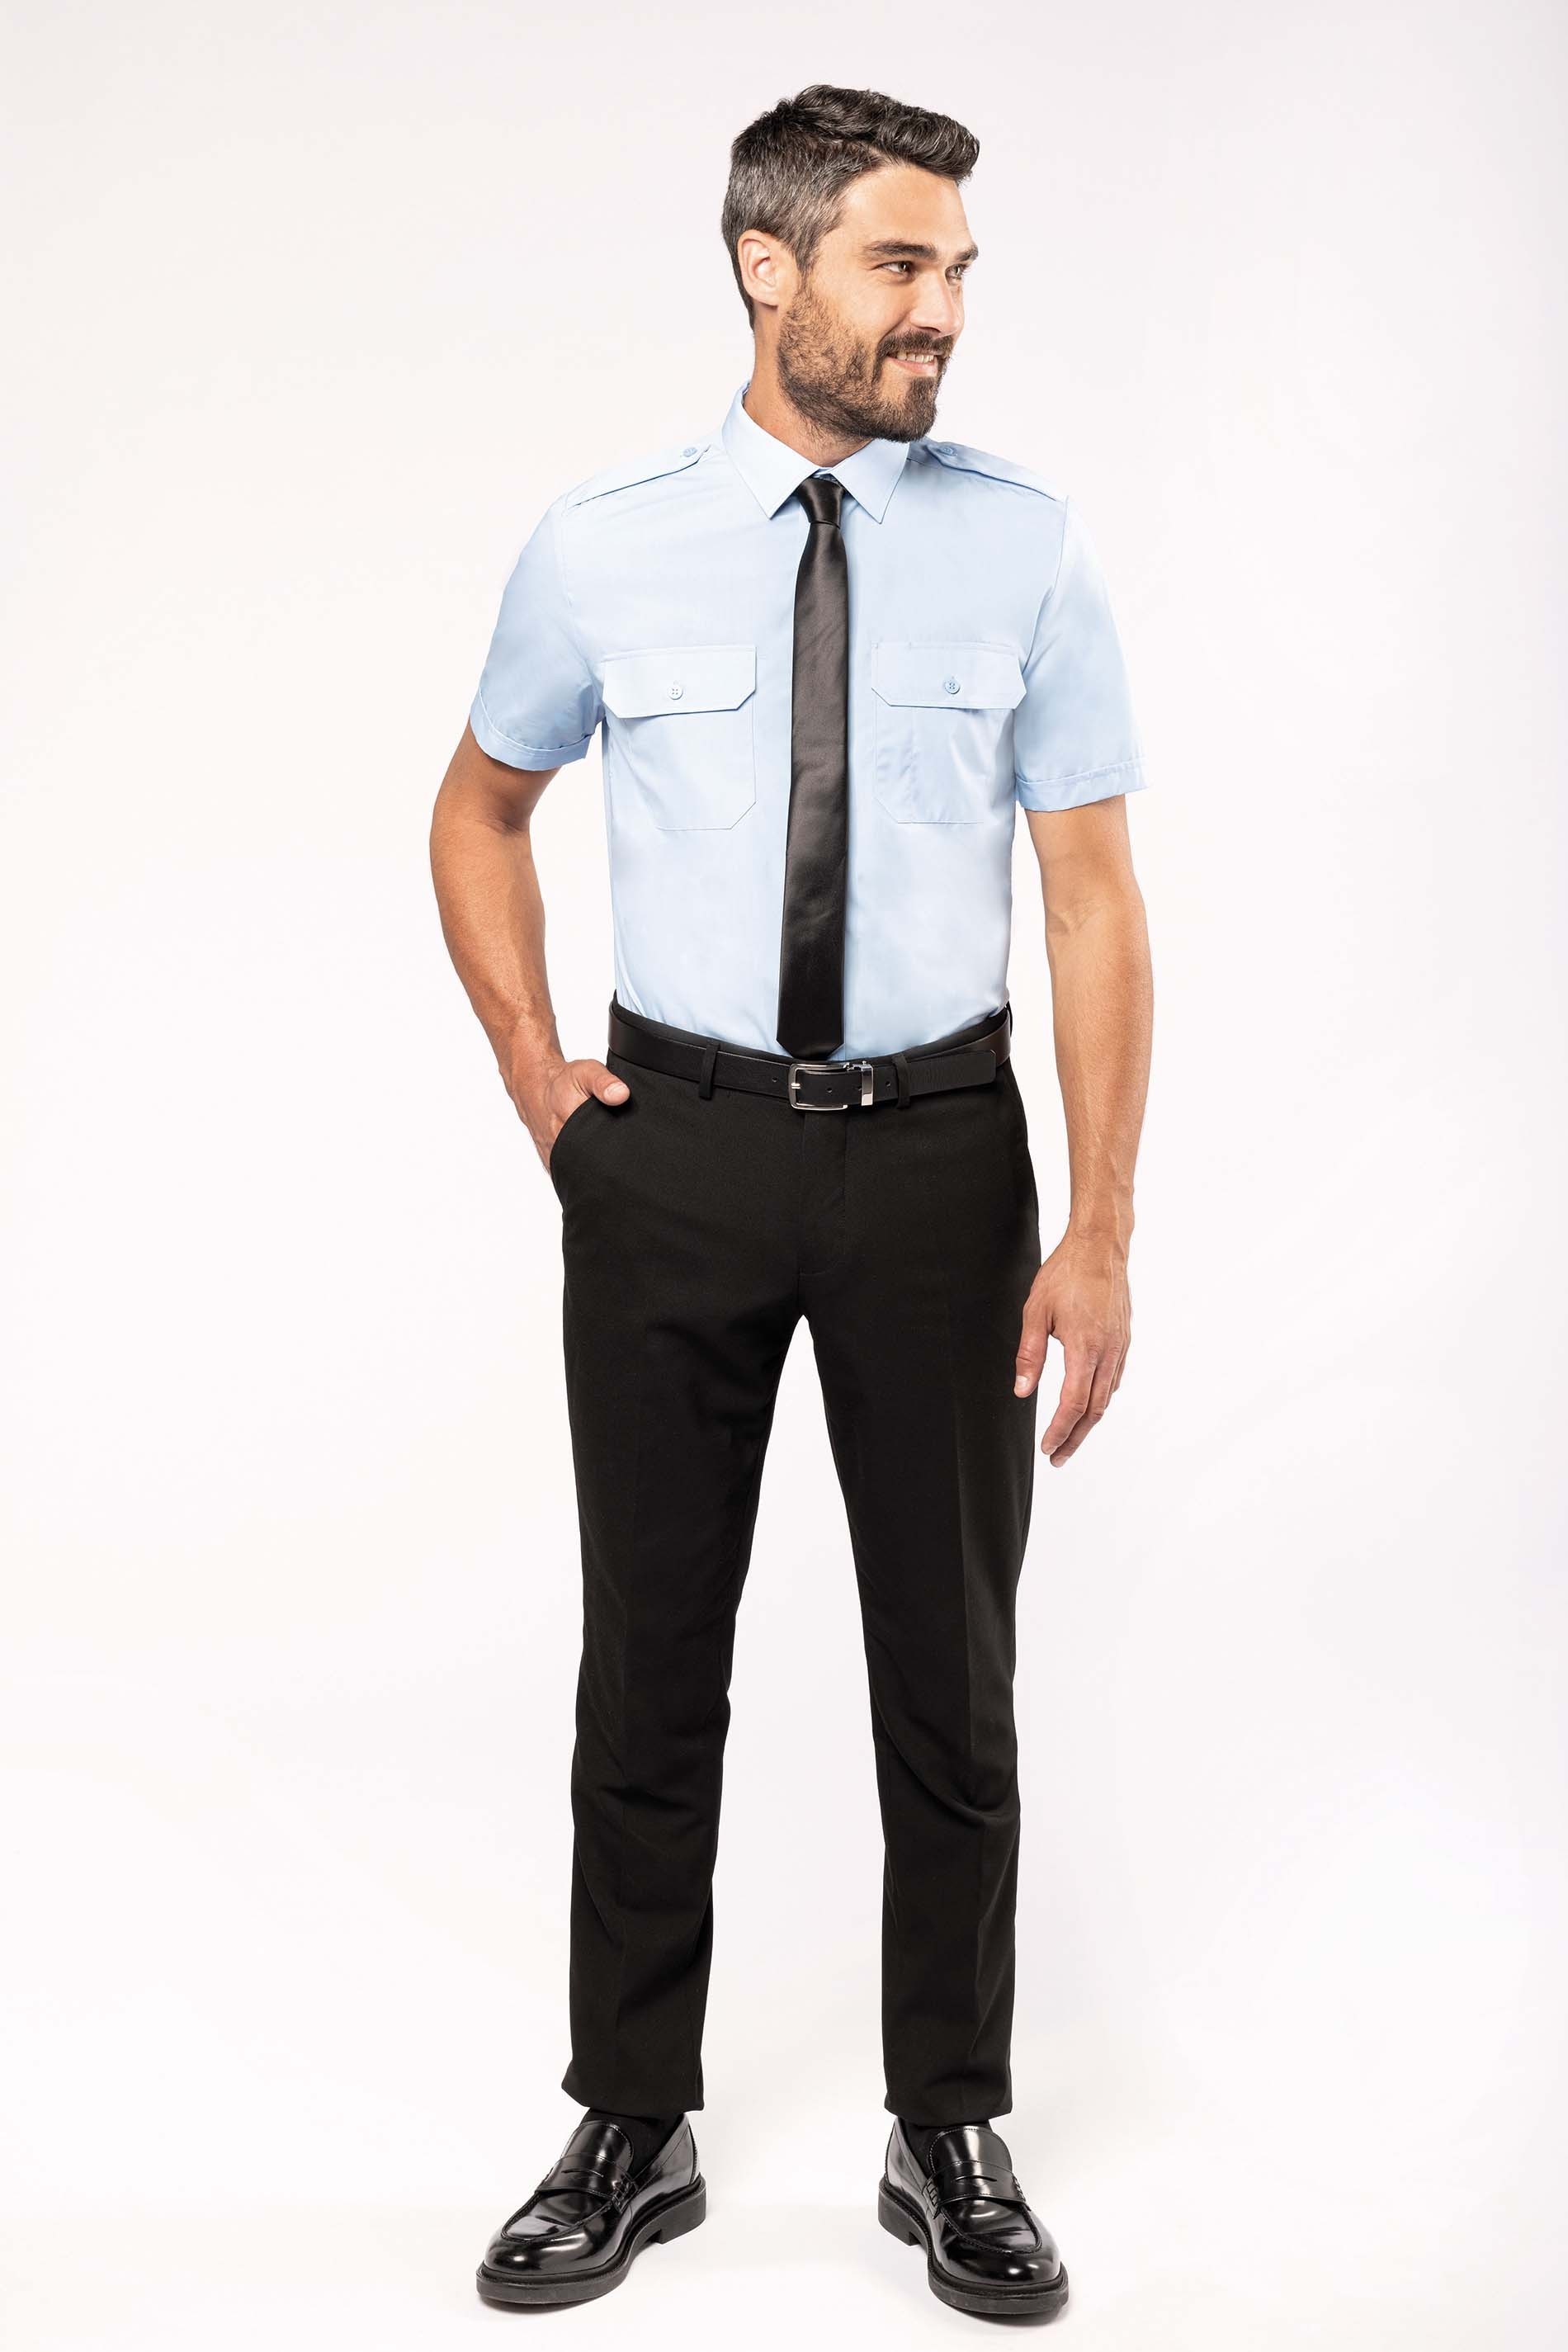 Chemise pilote manches courtes homme